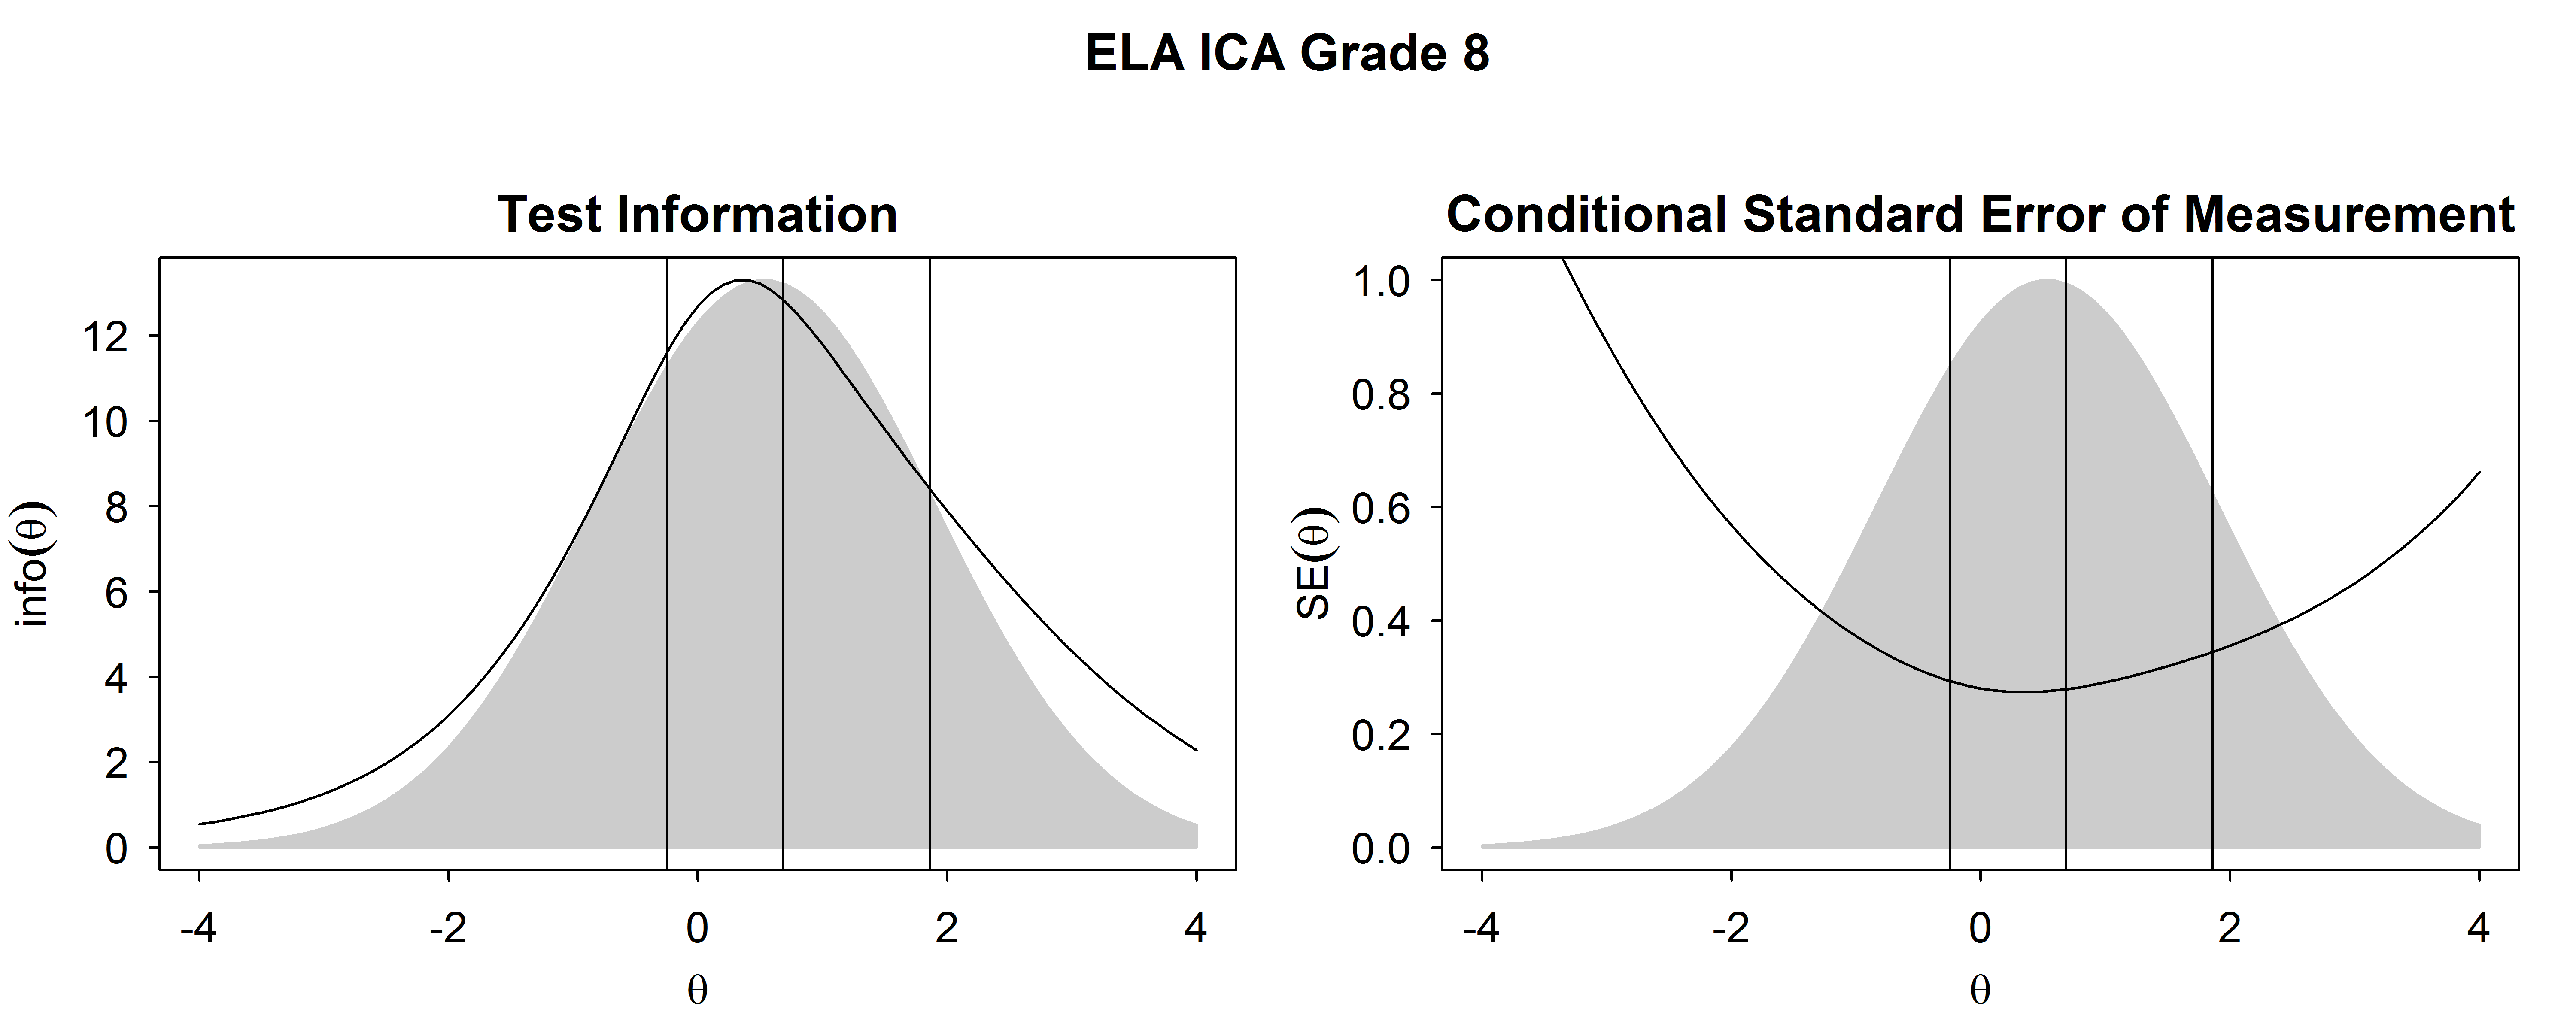 Test Information Functions and SEM For ELA/Literacy ICA, Grade 8